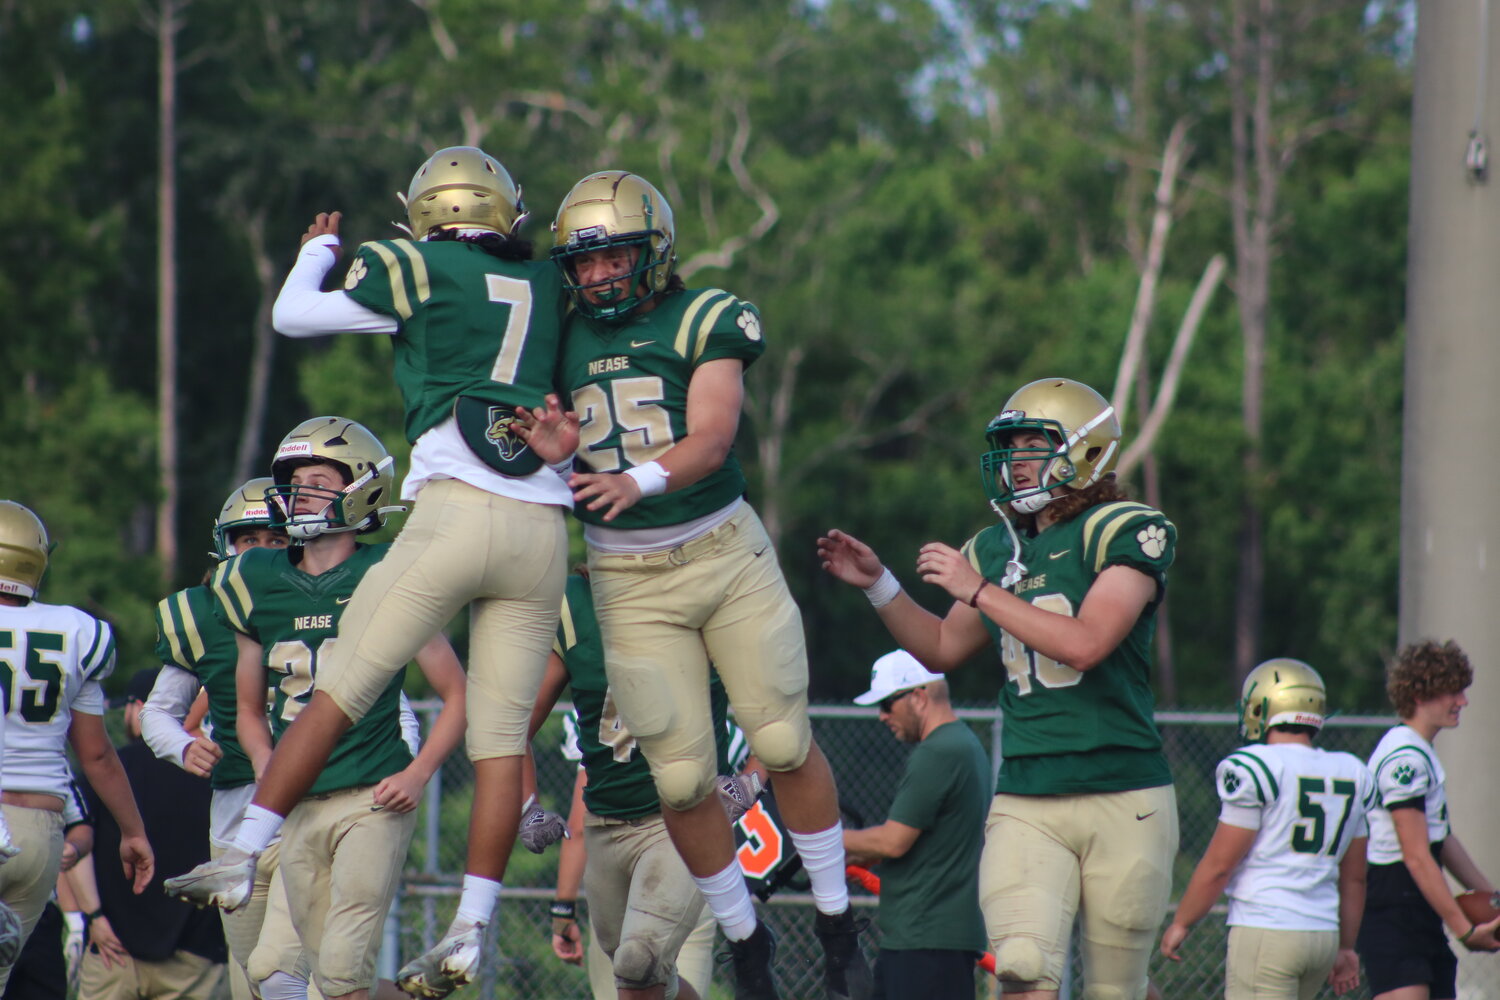 Nease football players on the green team celebrate following a turnover forced by the defense during the green and gold game at Panther Stadium May 12.